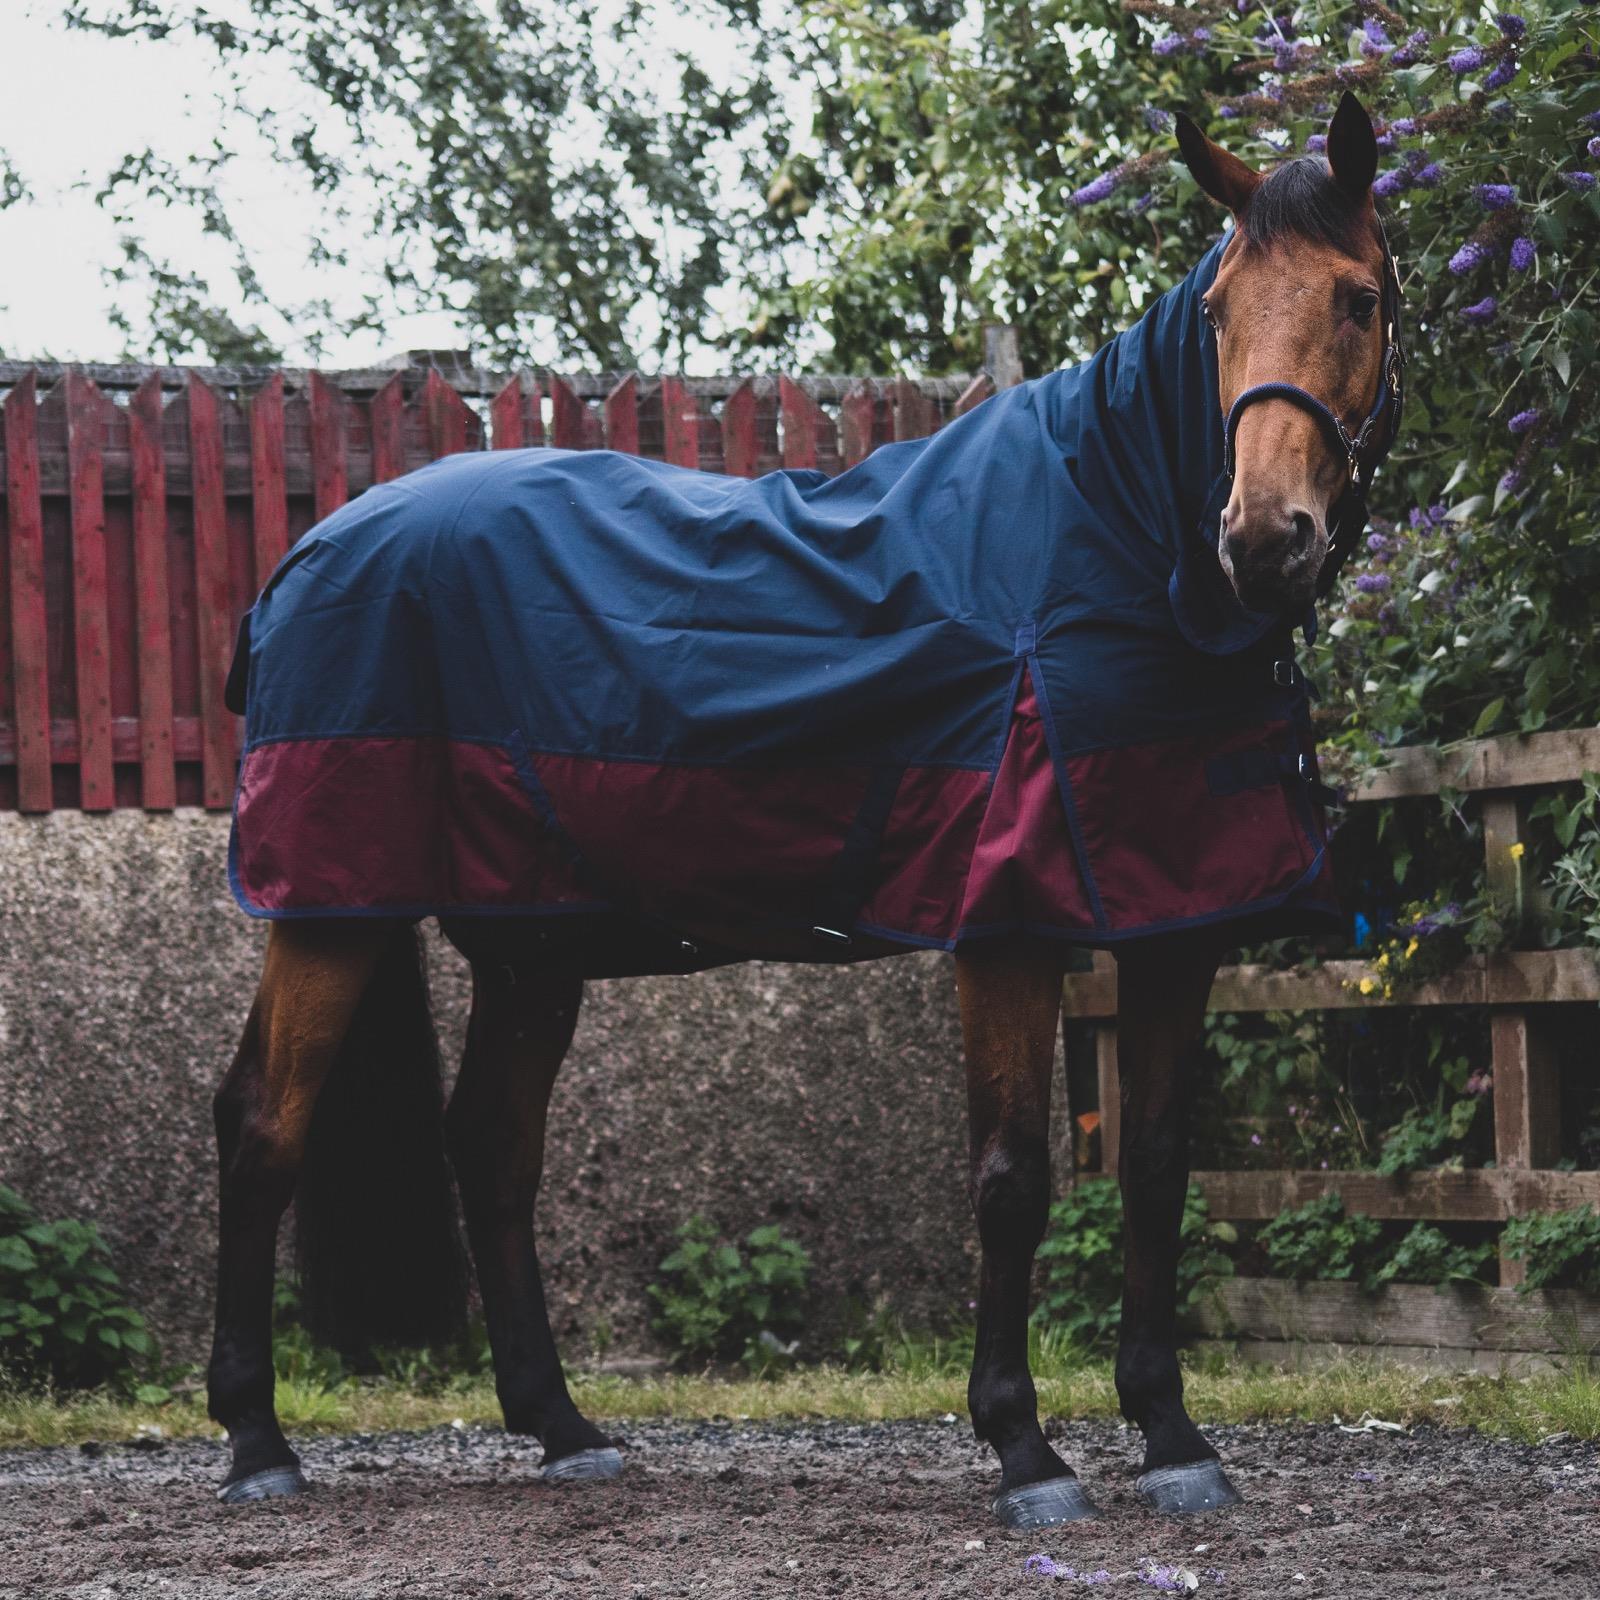 600D Outdoor Winter Turnout Horse Rugs 350G Fill Combo Neck Navy/Burgundy 5'3-6'9 - Tack24